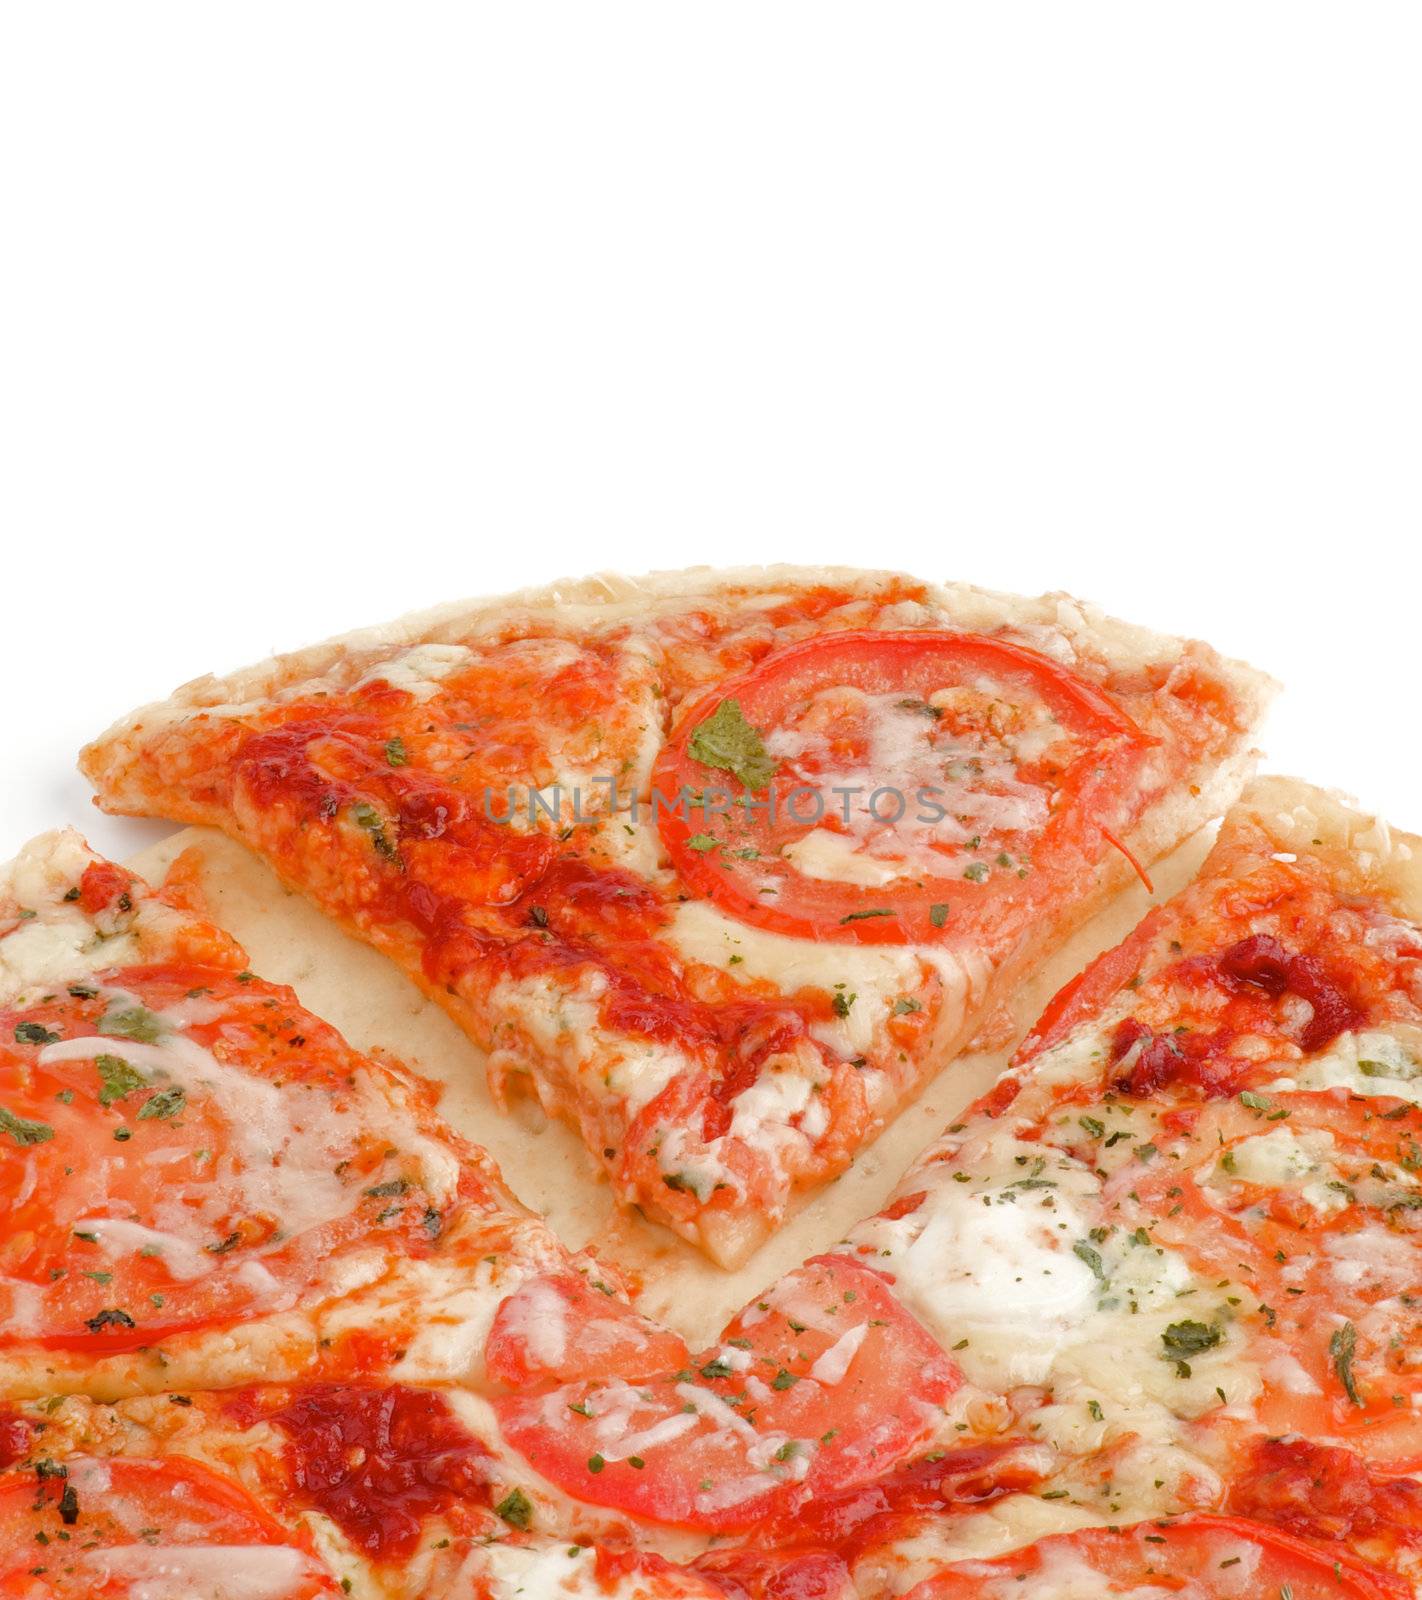 Piece of and Whole Cheese Pizza with Tomatoes and Greens closeup on white background